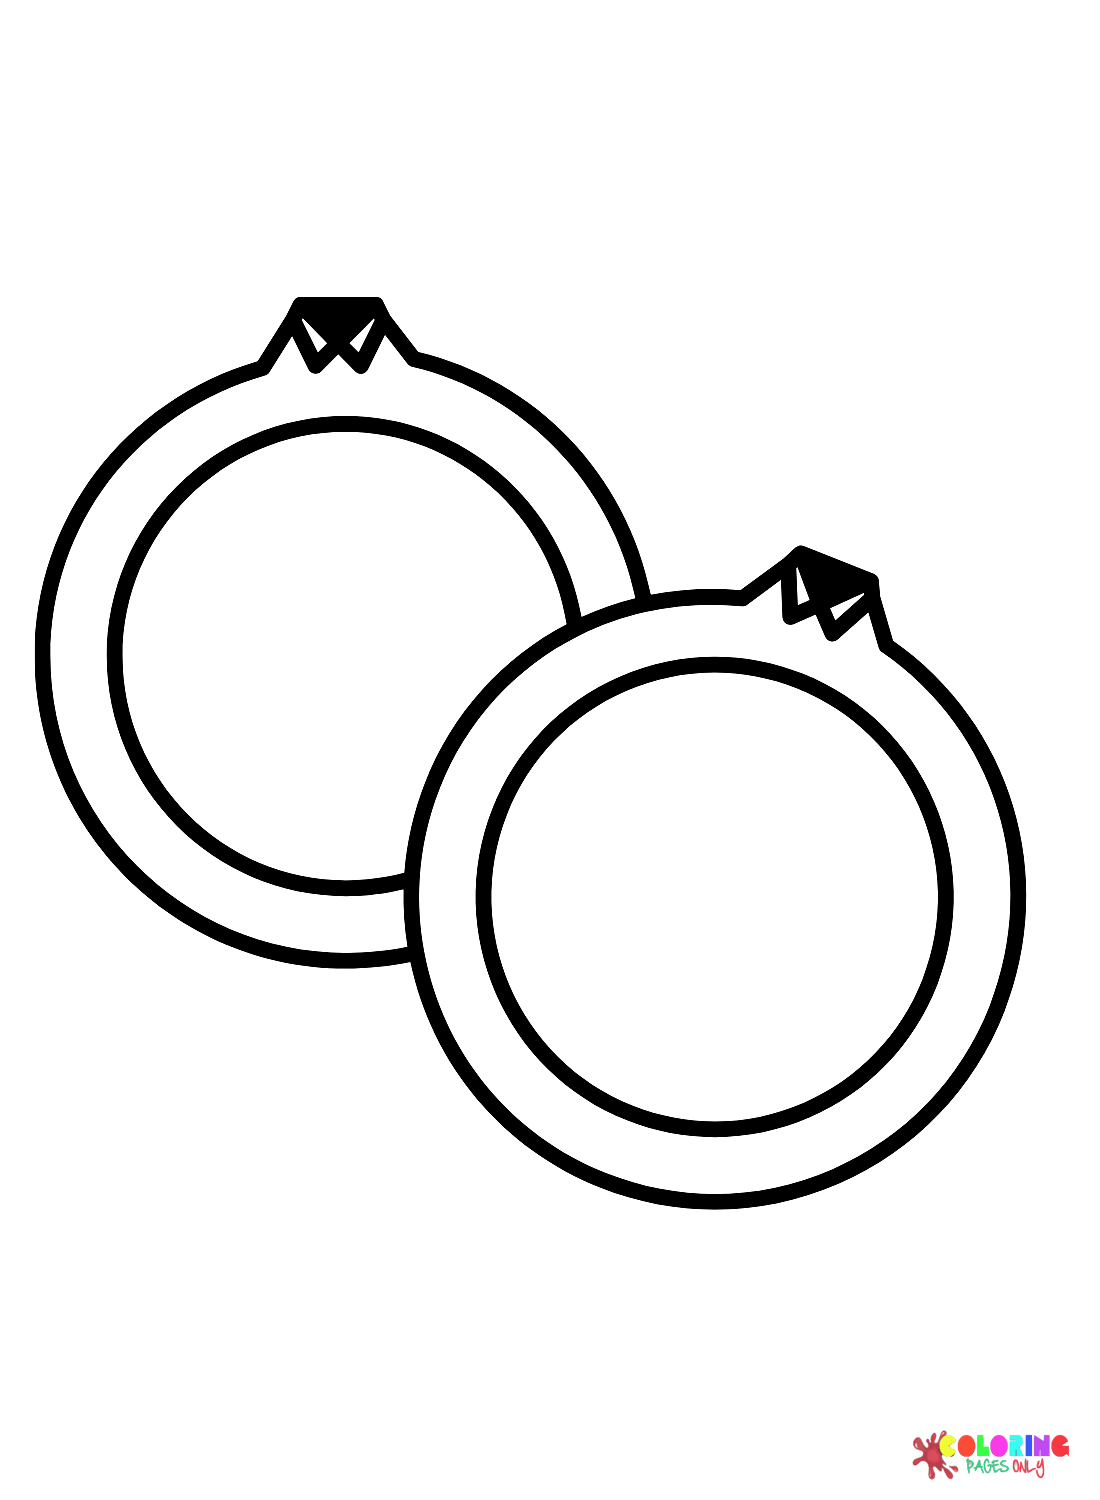 Marriage rings coloring pages